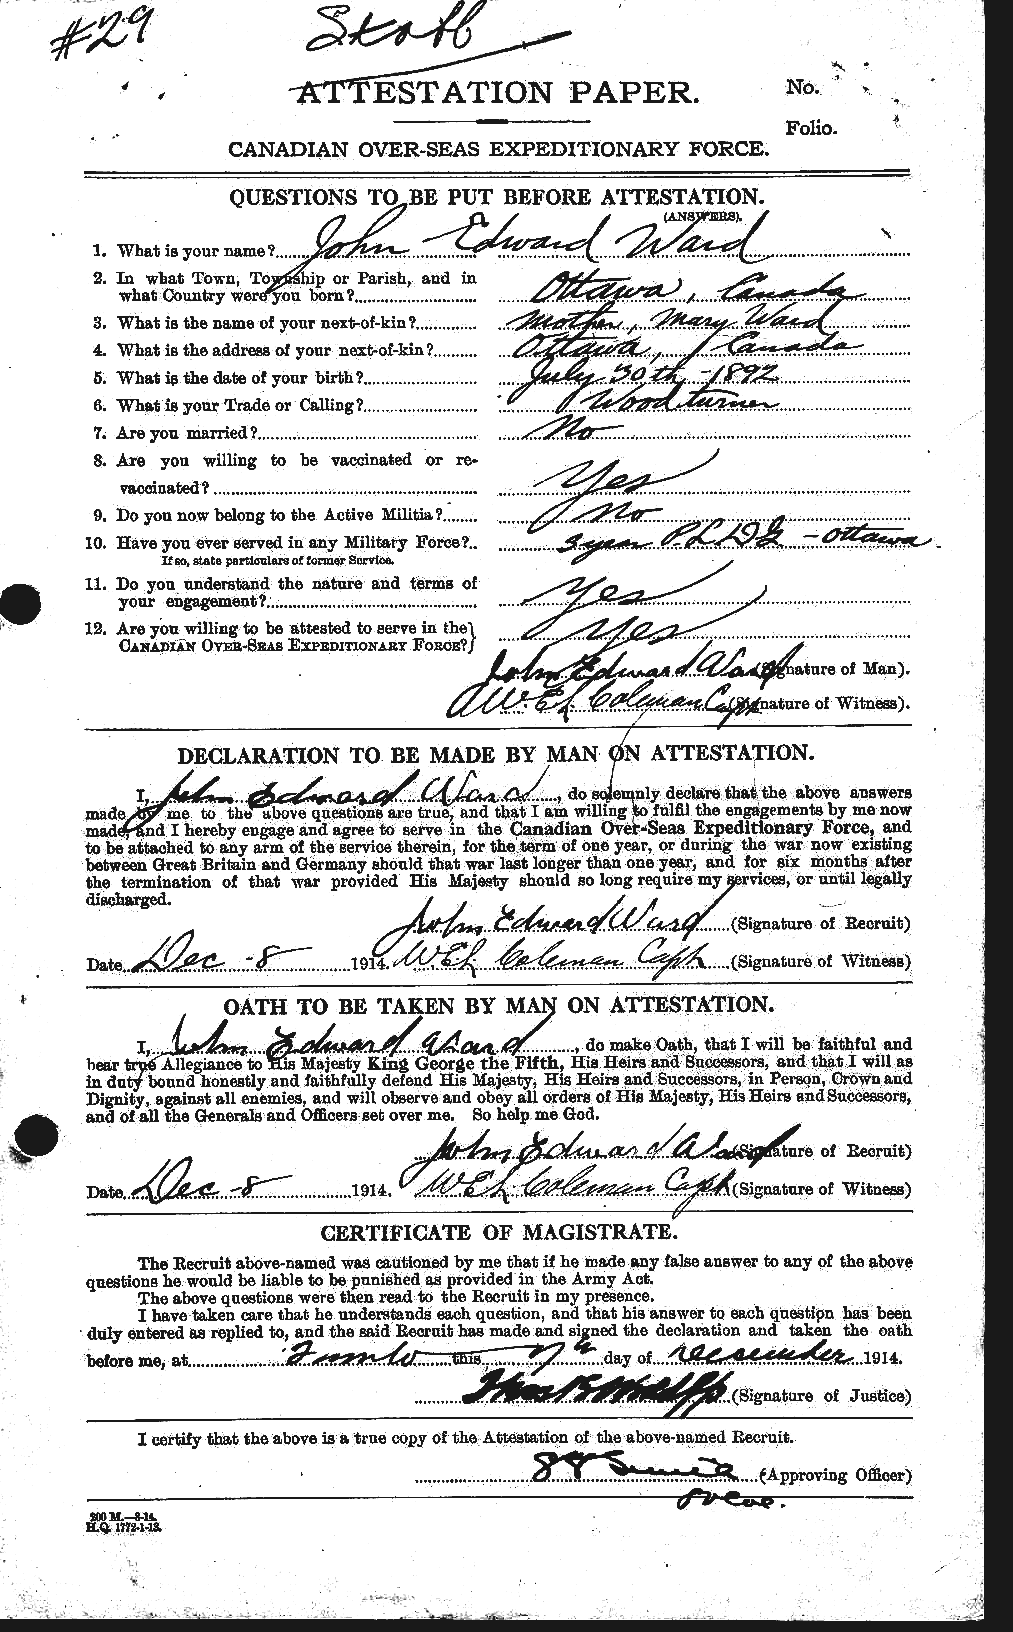 Personnel Records of the First World War - CEF 659518a